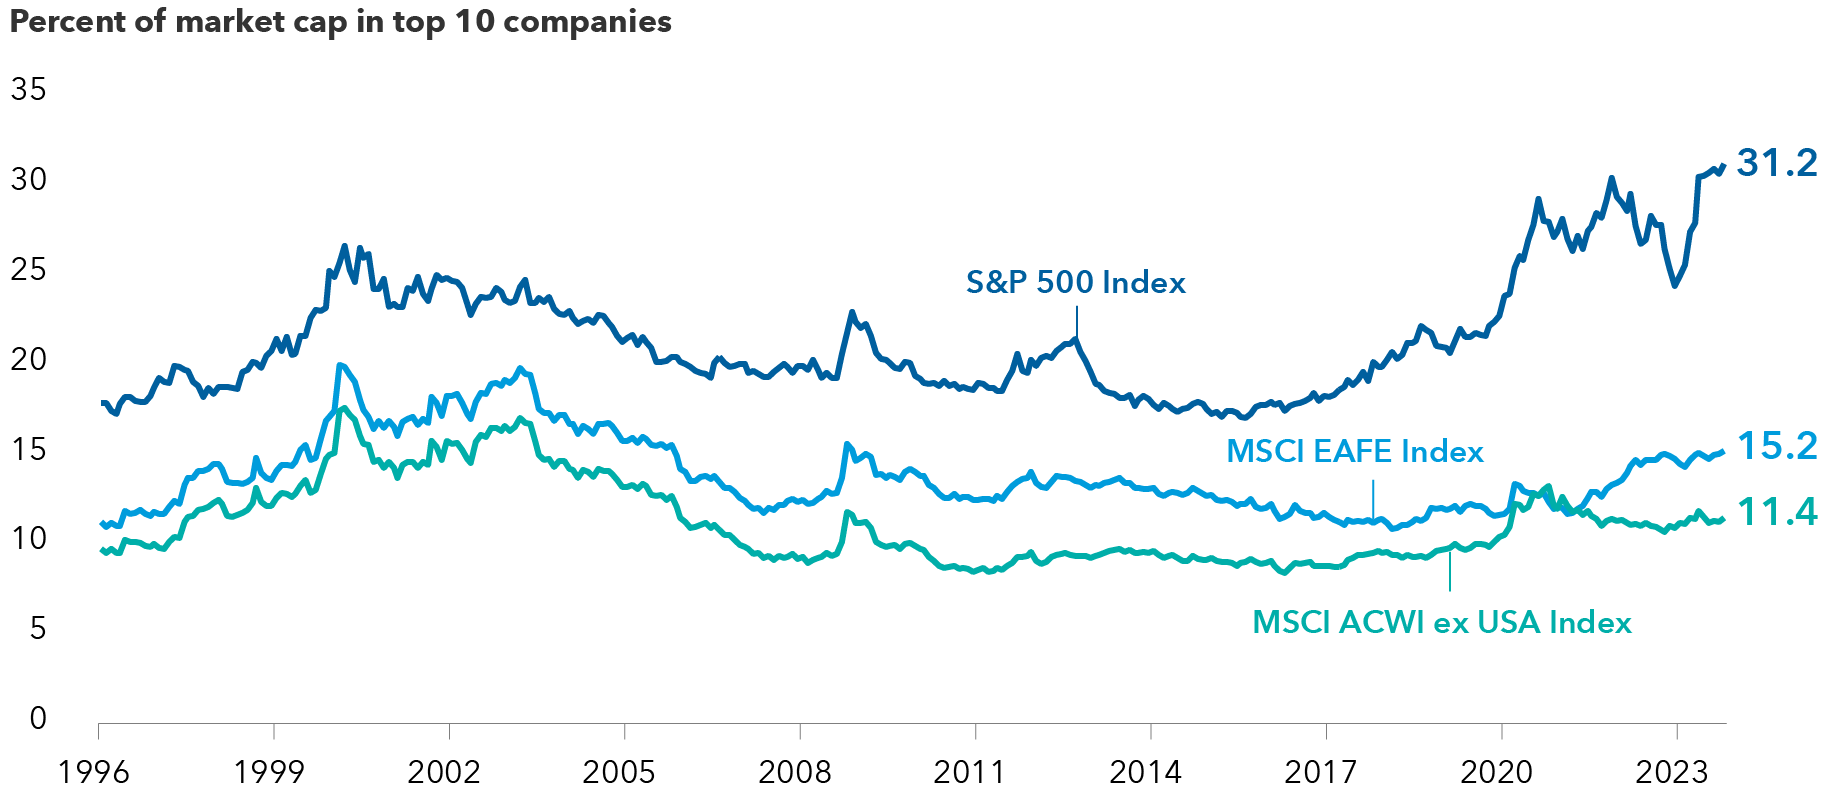 The image shows a line graph tracking the weighting of the 10 largest companies from 1996 through October 2023 in three stock indexes: The S&P 500 Index, the M.S.C.I. E.A.F.E. Index and the M.S.C.I. A.C.W.I. ex U.S.A. Index. As of October 31, 2023, the weightings were as follows: 31.2% for the S&P 500 Index; 15.2% for the M.S.C.I. E.A.F.E. Index and 11.4% for the M.S.C.I. A.C.W.I. ex U.S.A. Index.